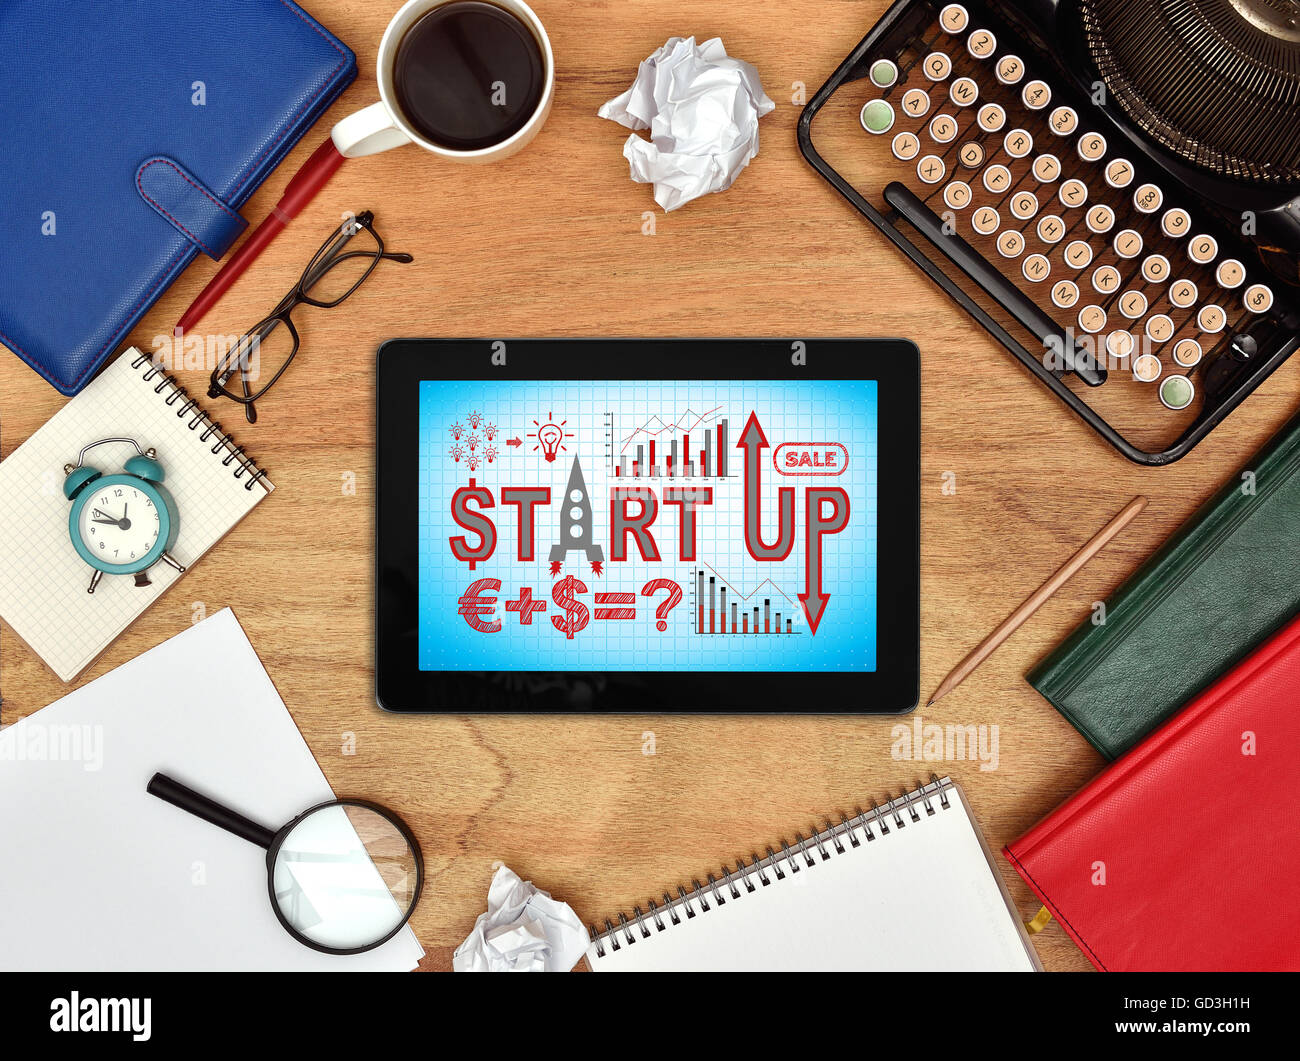 tablet with start up concept, vintage typewriter and business object on wooden table Stock Photo